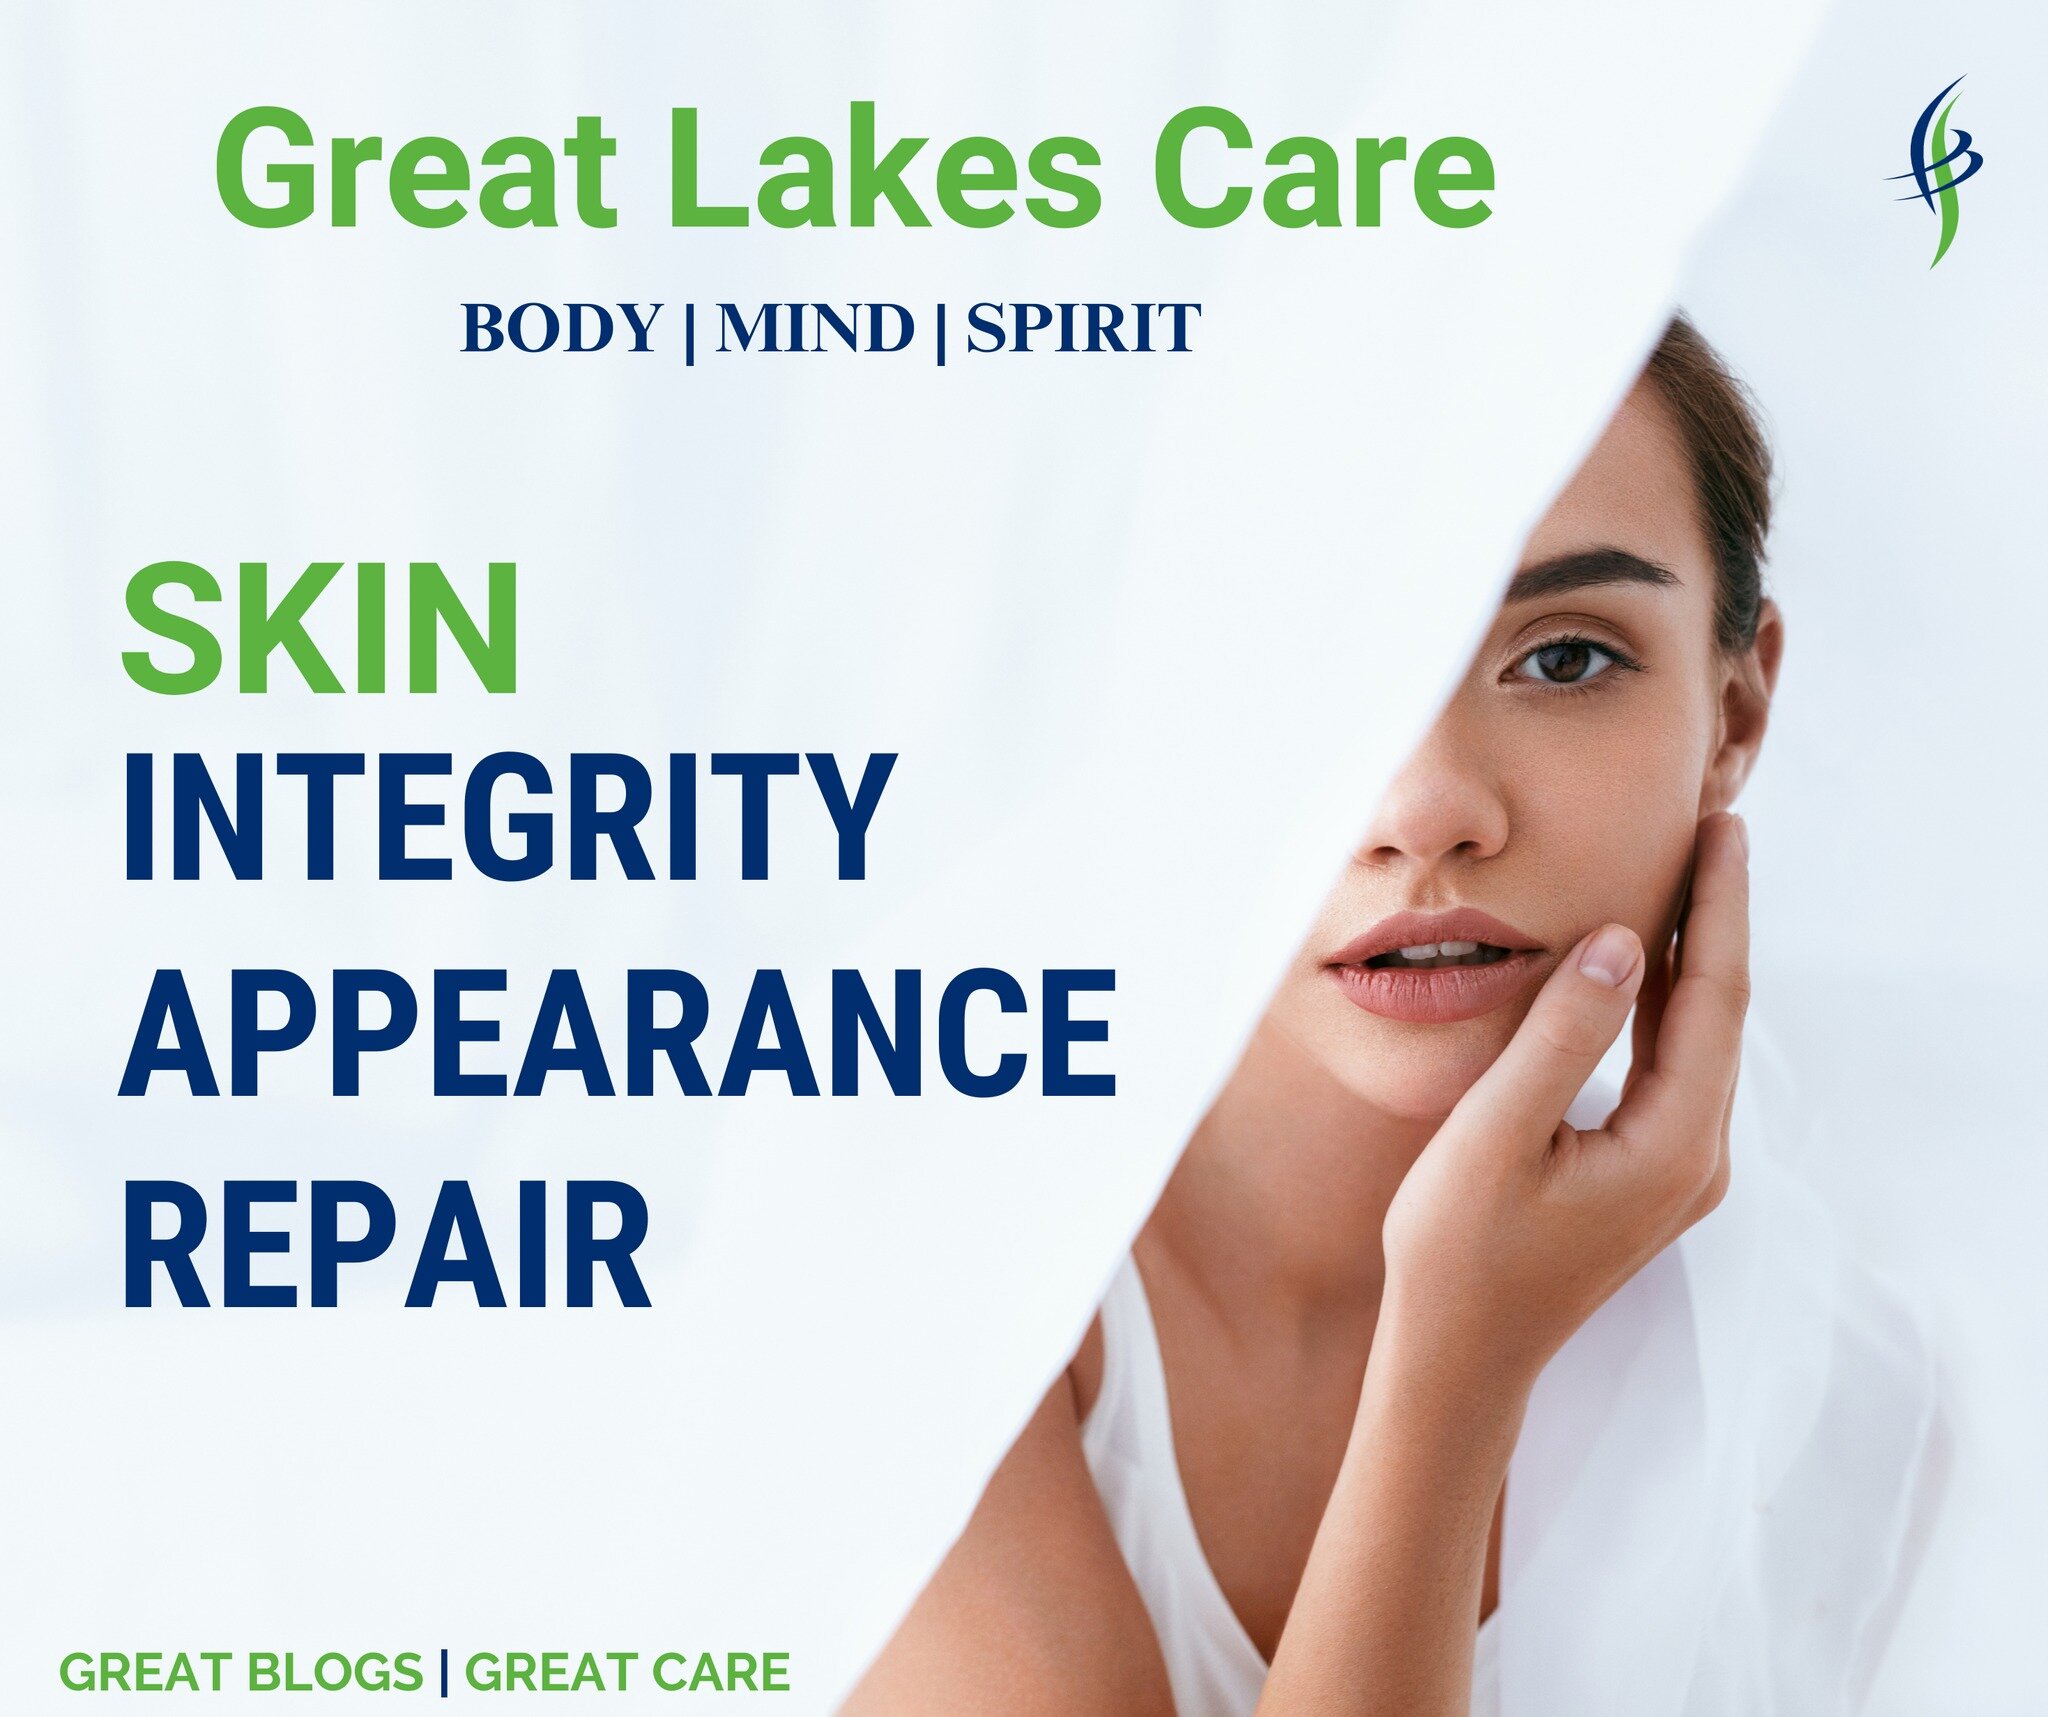 Skin quality has been shown to substantially impact emotional health, quality of life, self-perception, and interactions with others. Good skin care helps your complexion look healthy and glowing, helps you look more youthful, prevents acne, and redu